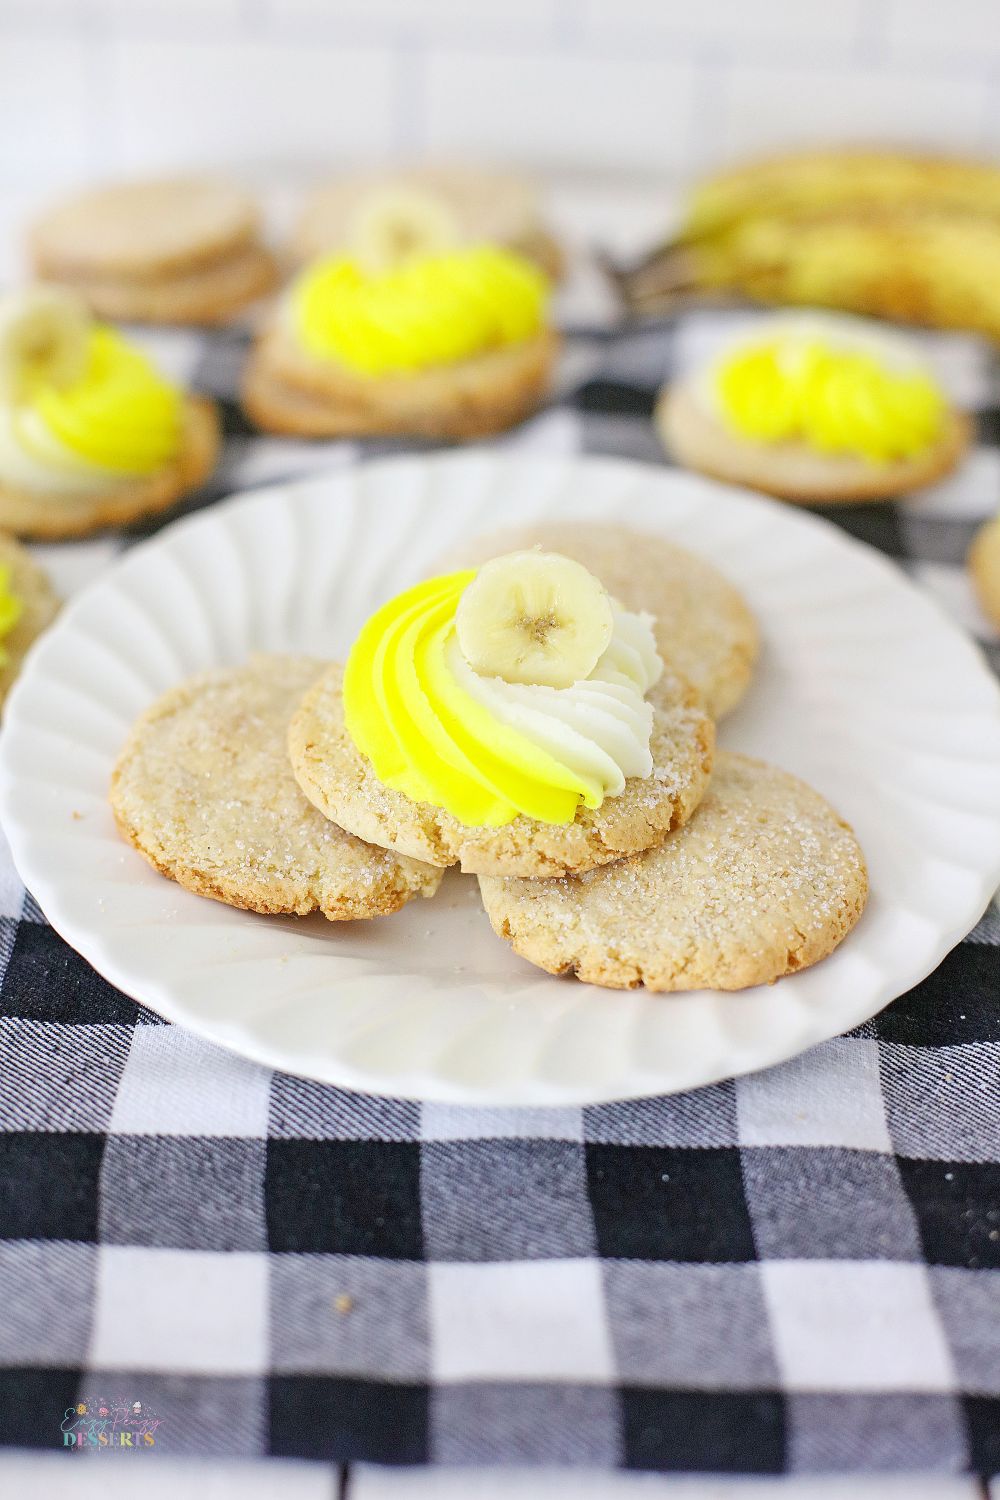 Image of frosted banana cookies on a white dessert plate